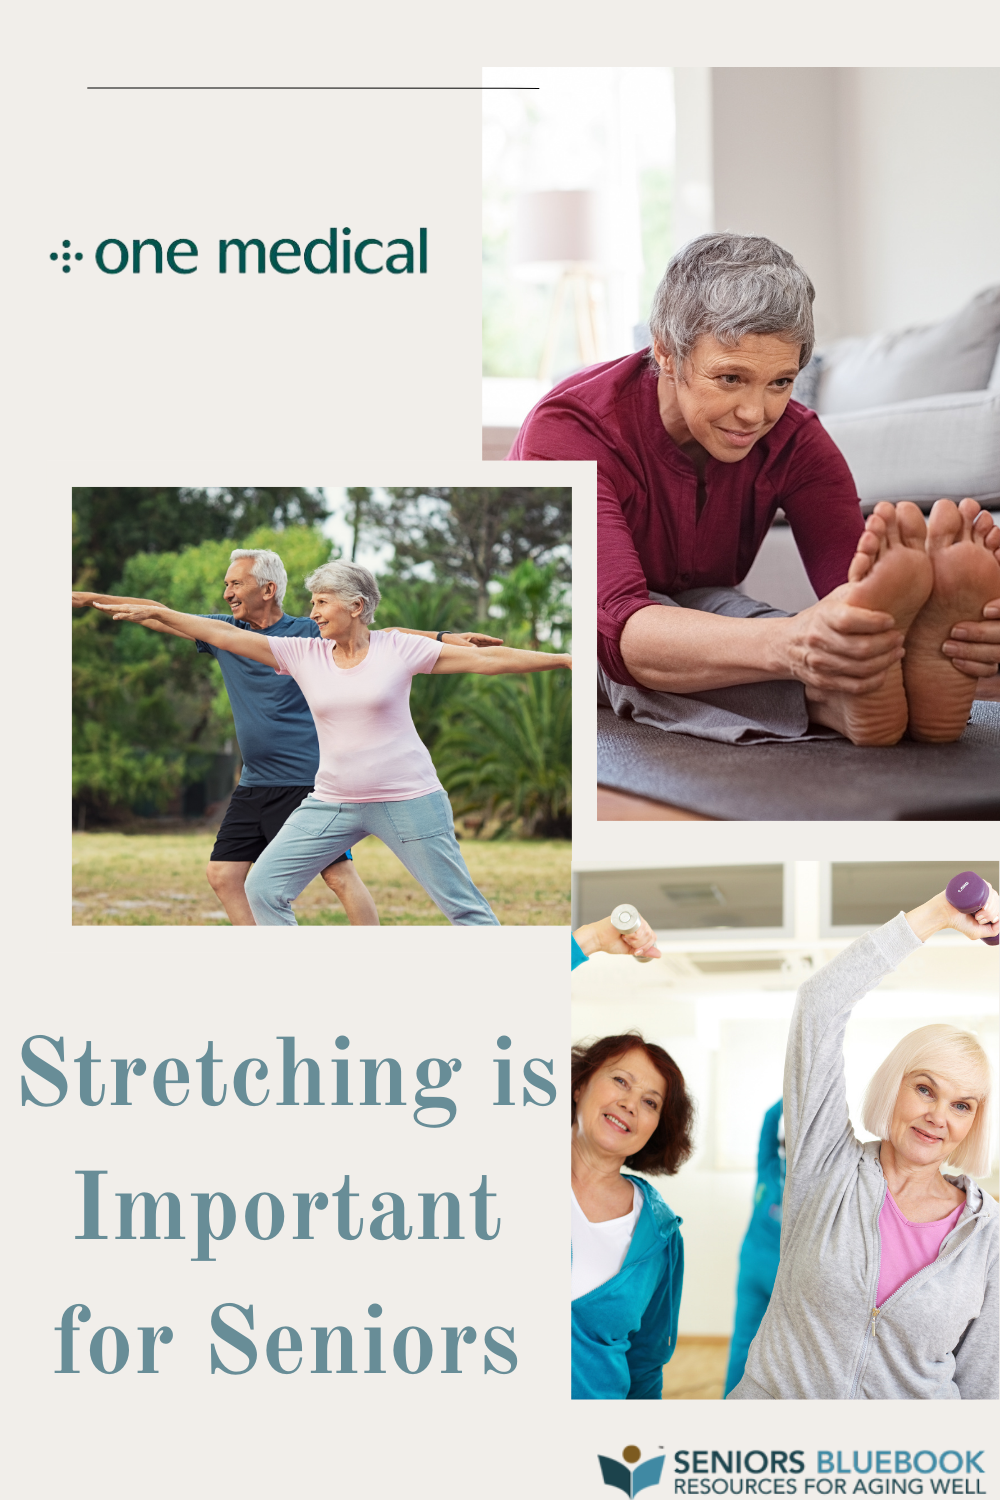 https://seniorsbluebook.com/listing/1684437525_Stretching%20is%20Important%20for%20Seniors.png